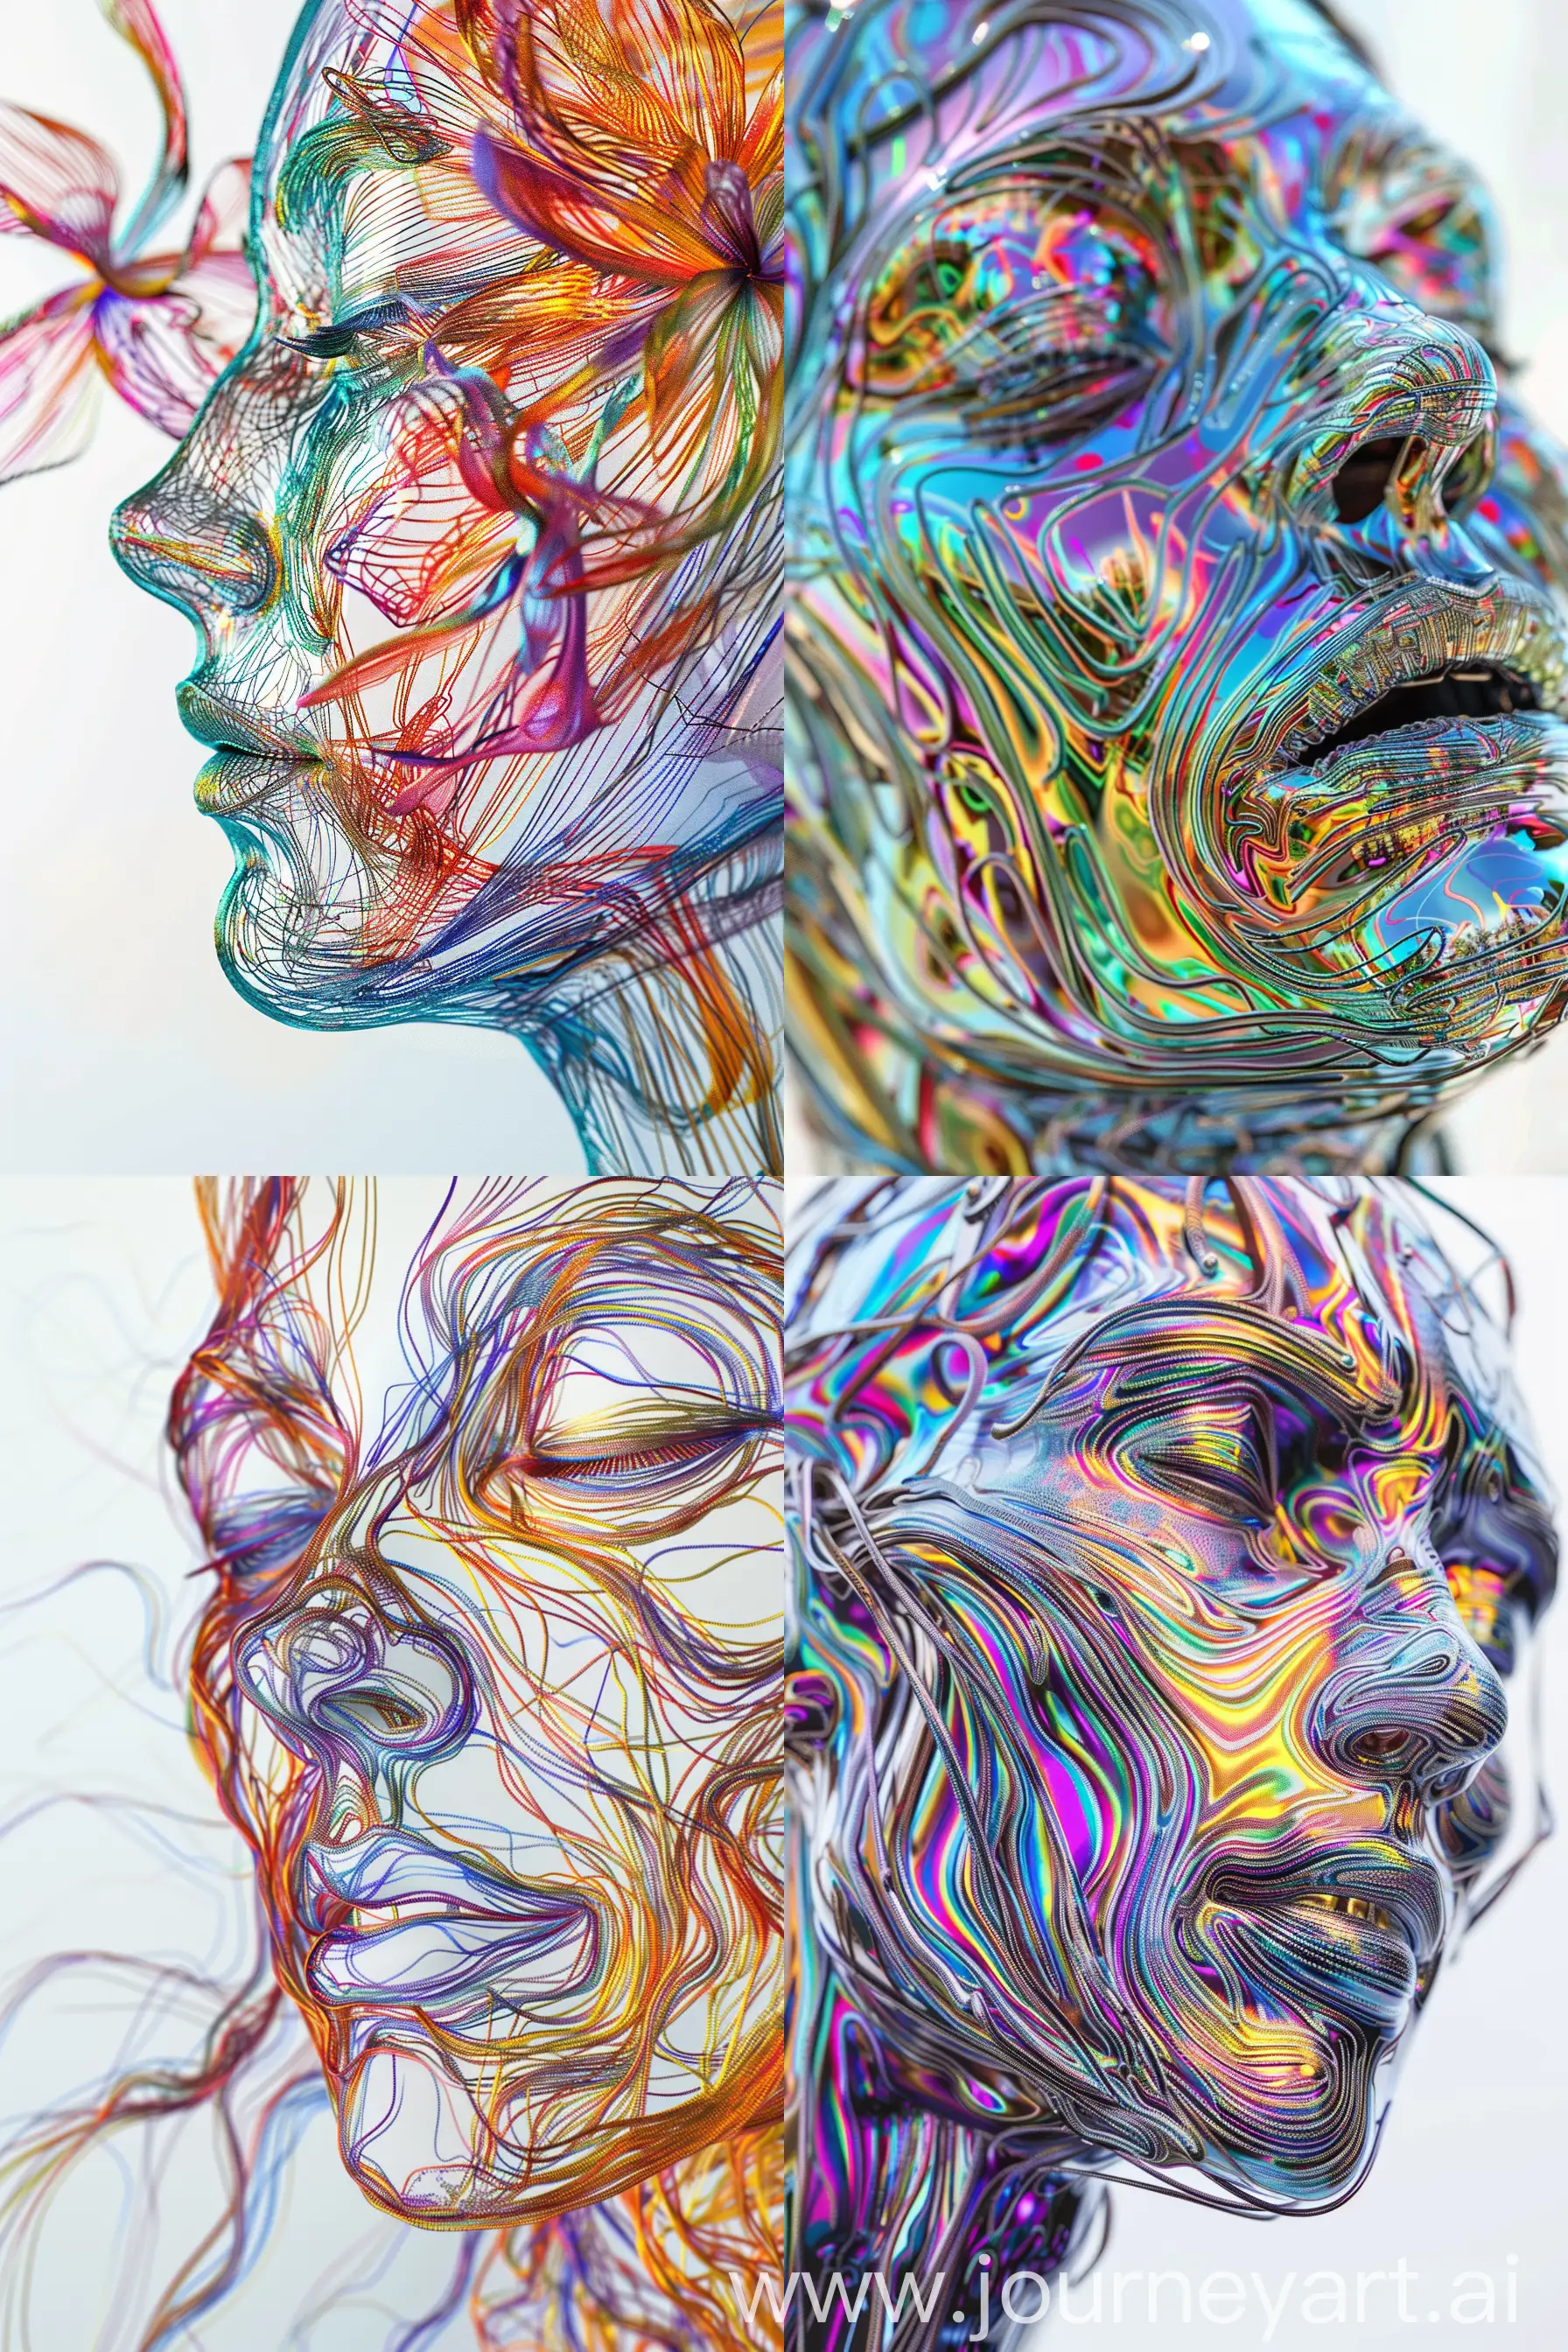 a close up of a drawing of a flower, portrait of metallic face, colorful generative art, face line drawing, generative line art, houdini algorithm generative art, colorful melting human head, generative art, portrait of a digital shaman, wire sculpture drawings —ar 2:3